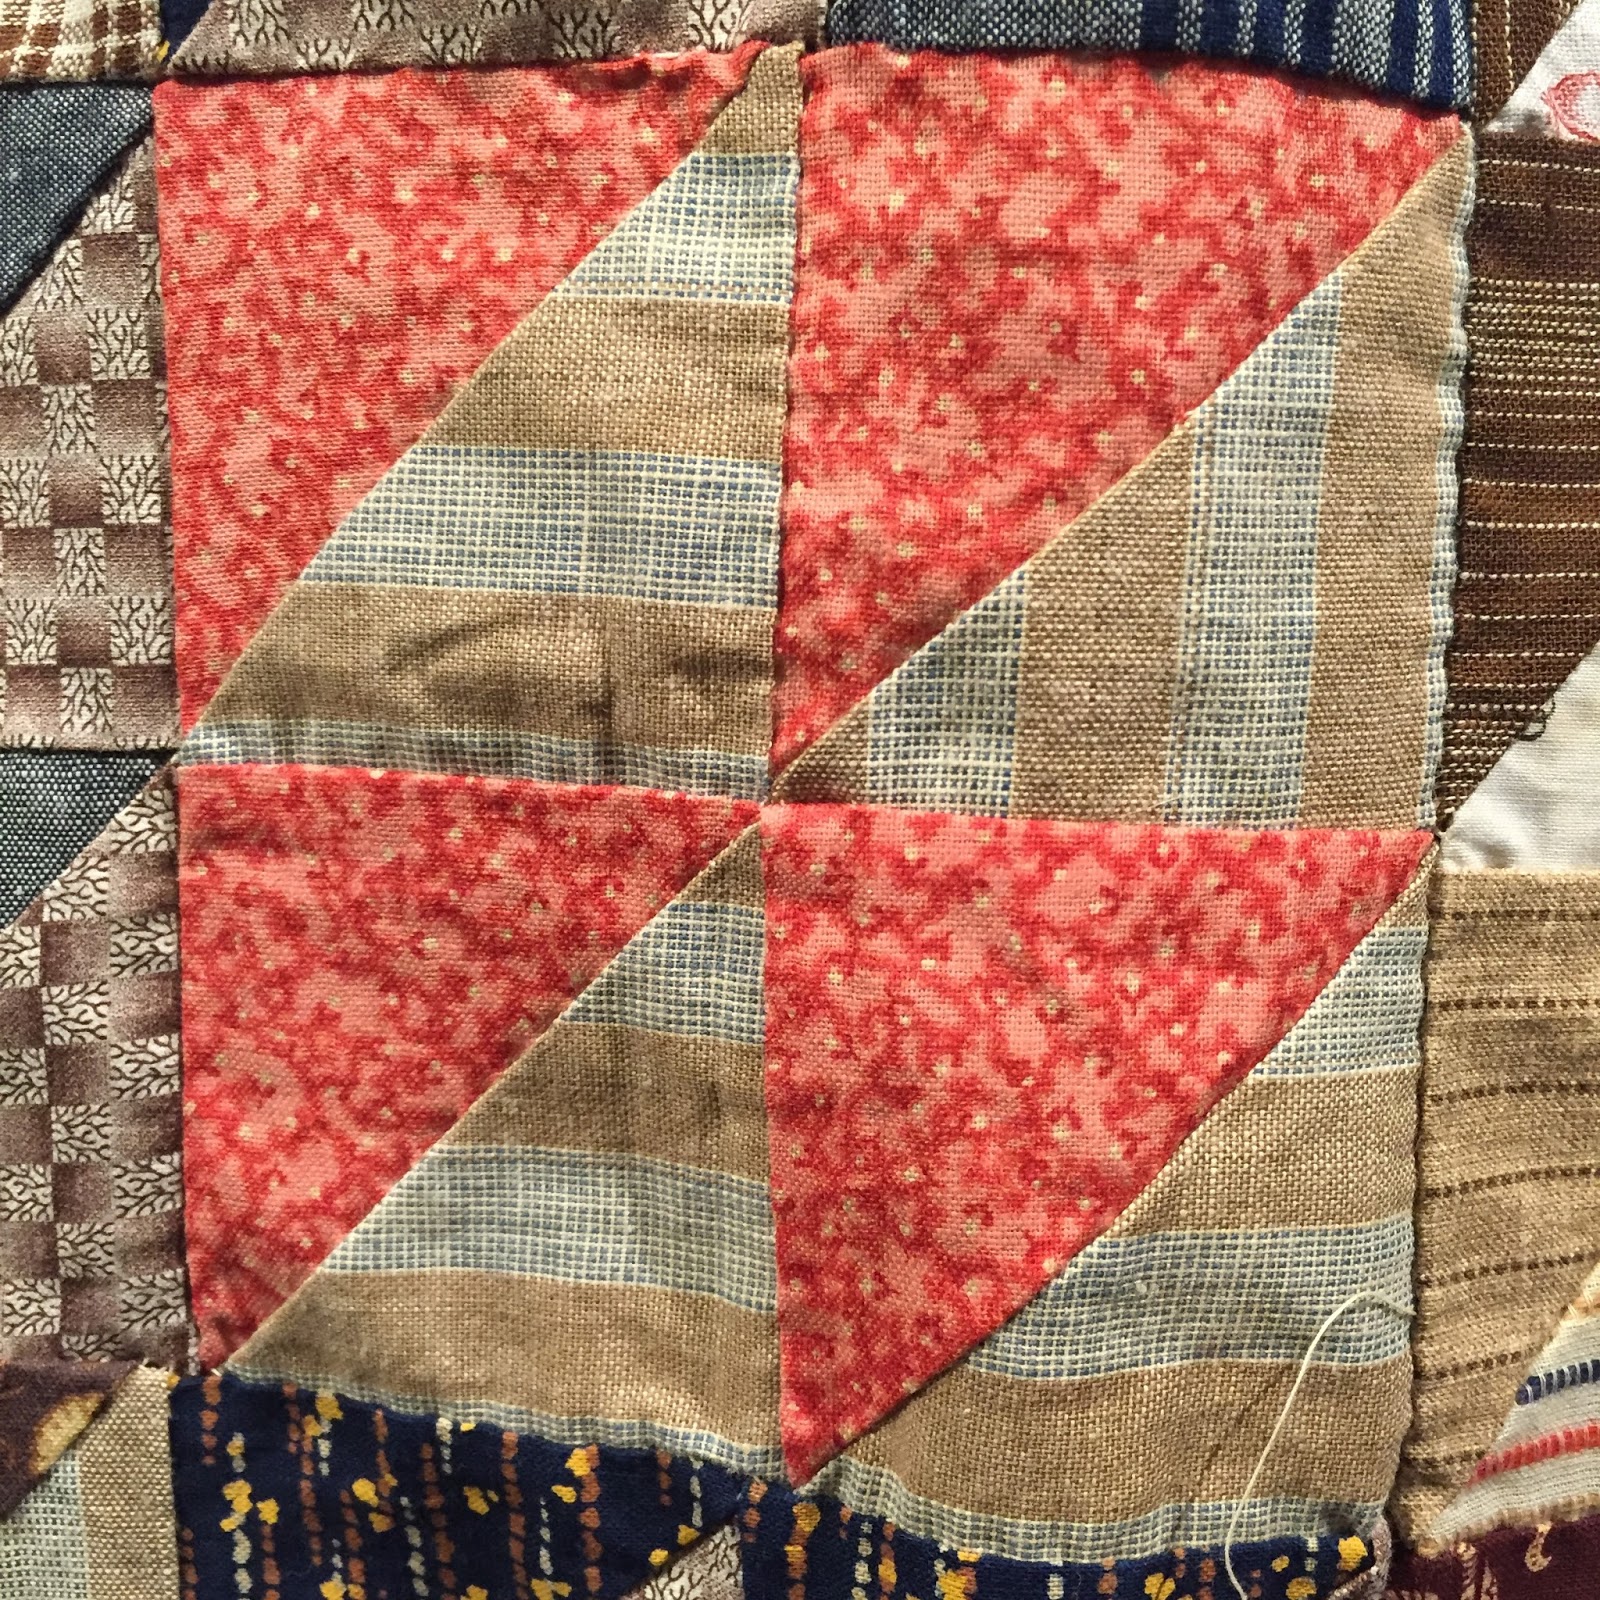 wabi-sabi quilts : More quilts at the NEQM